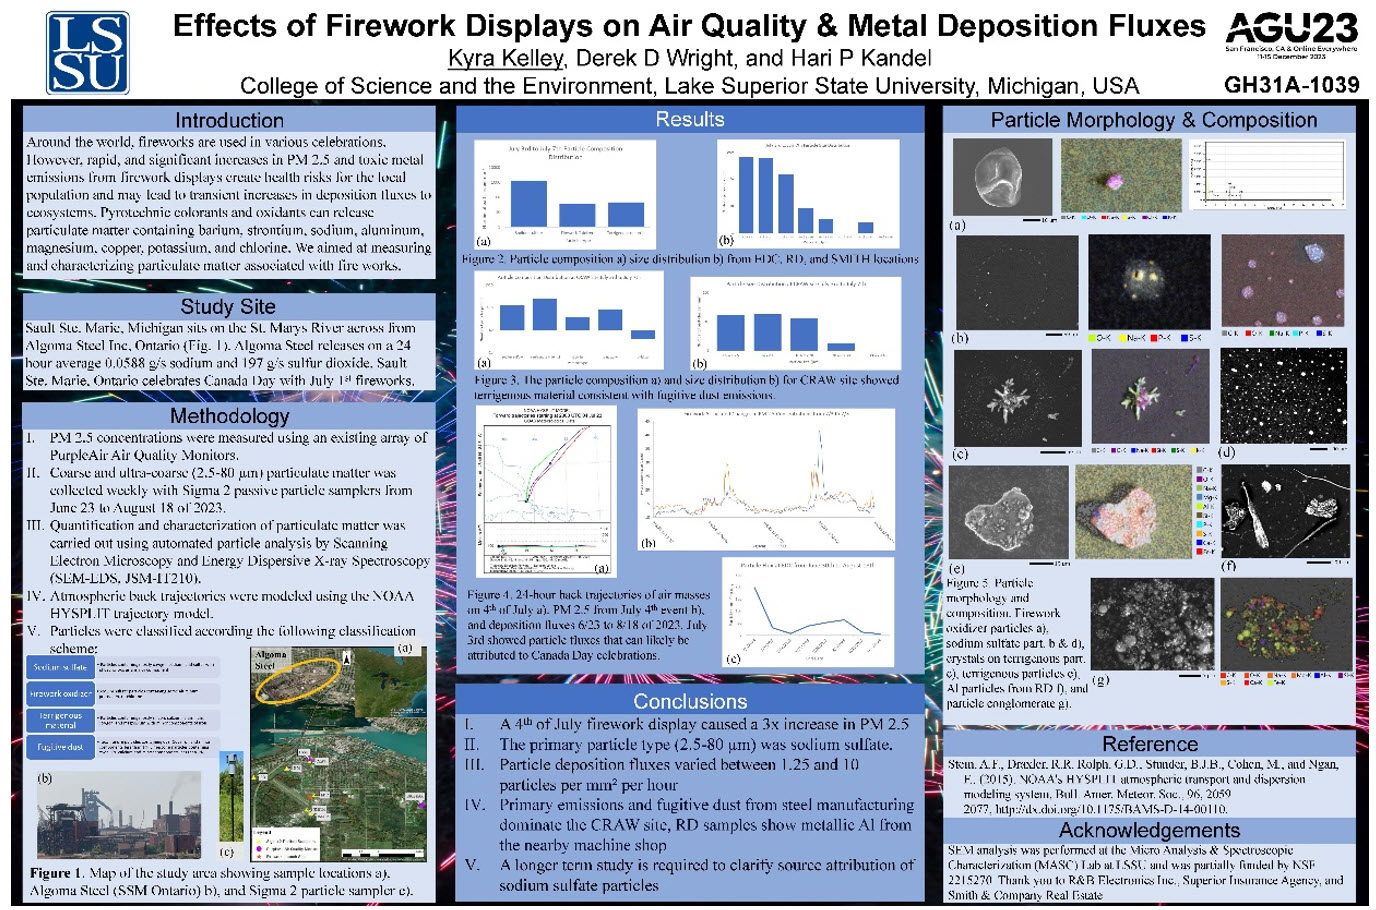 Effects of firework displays on air quality & metal deposition fluxes